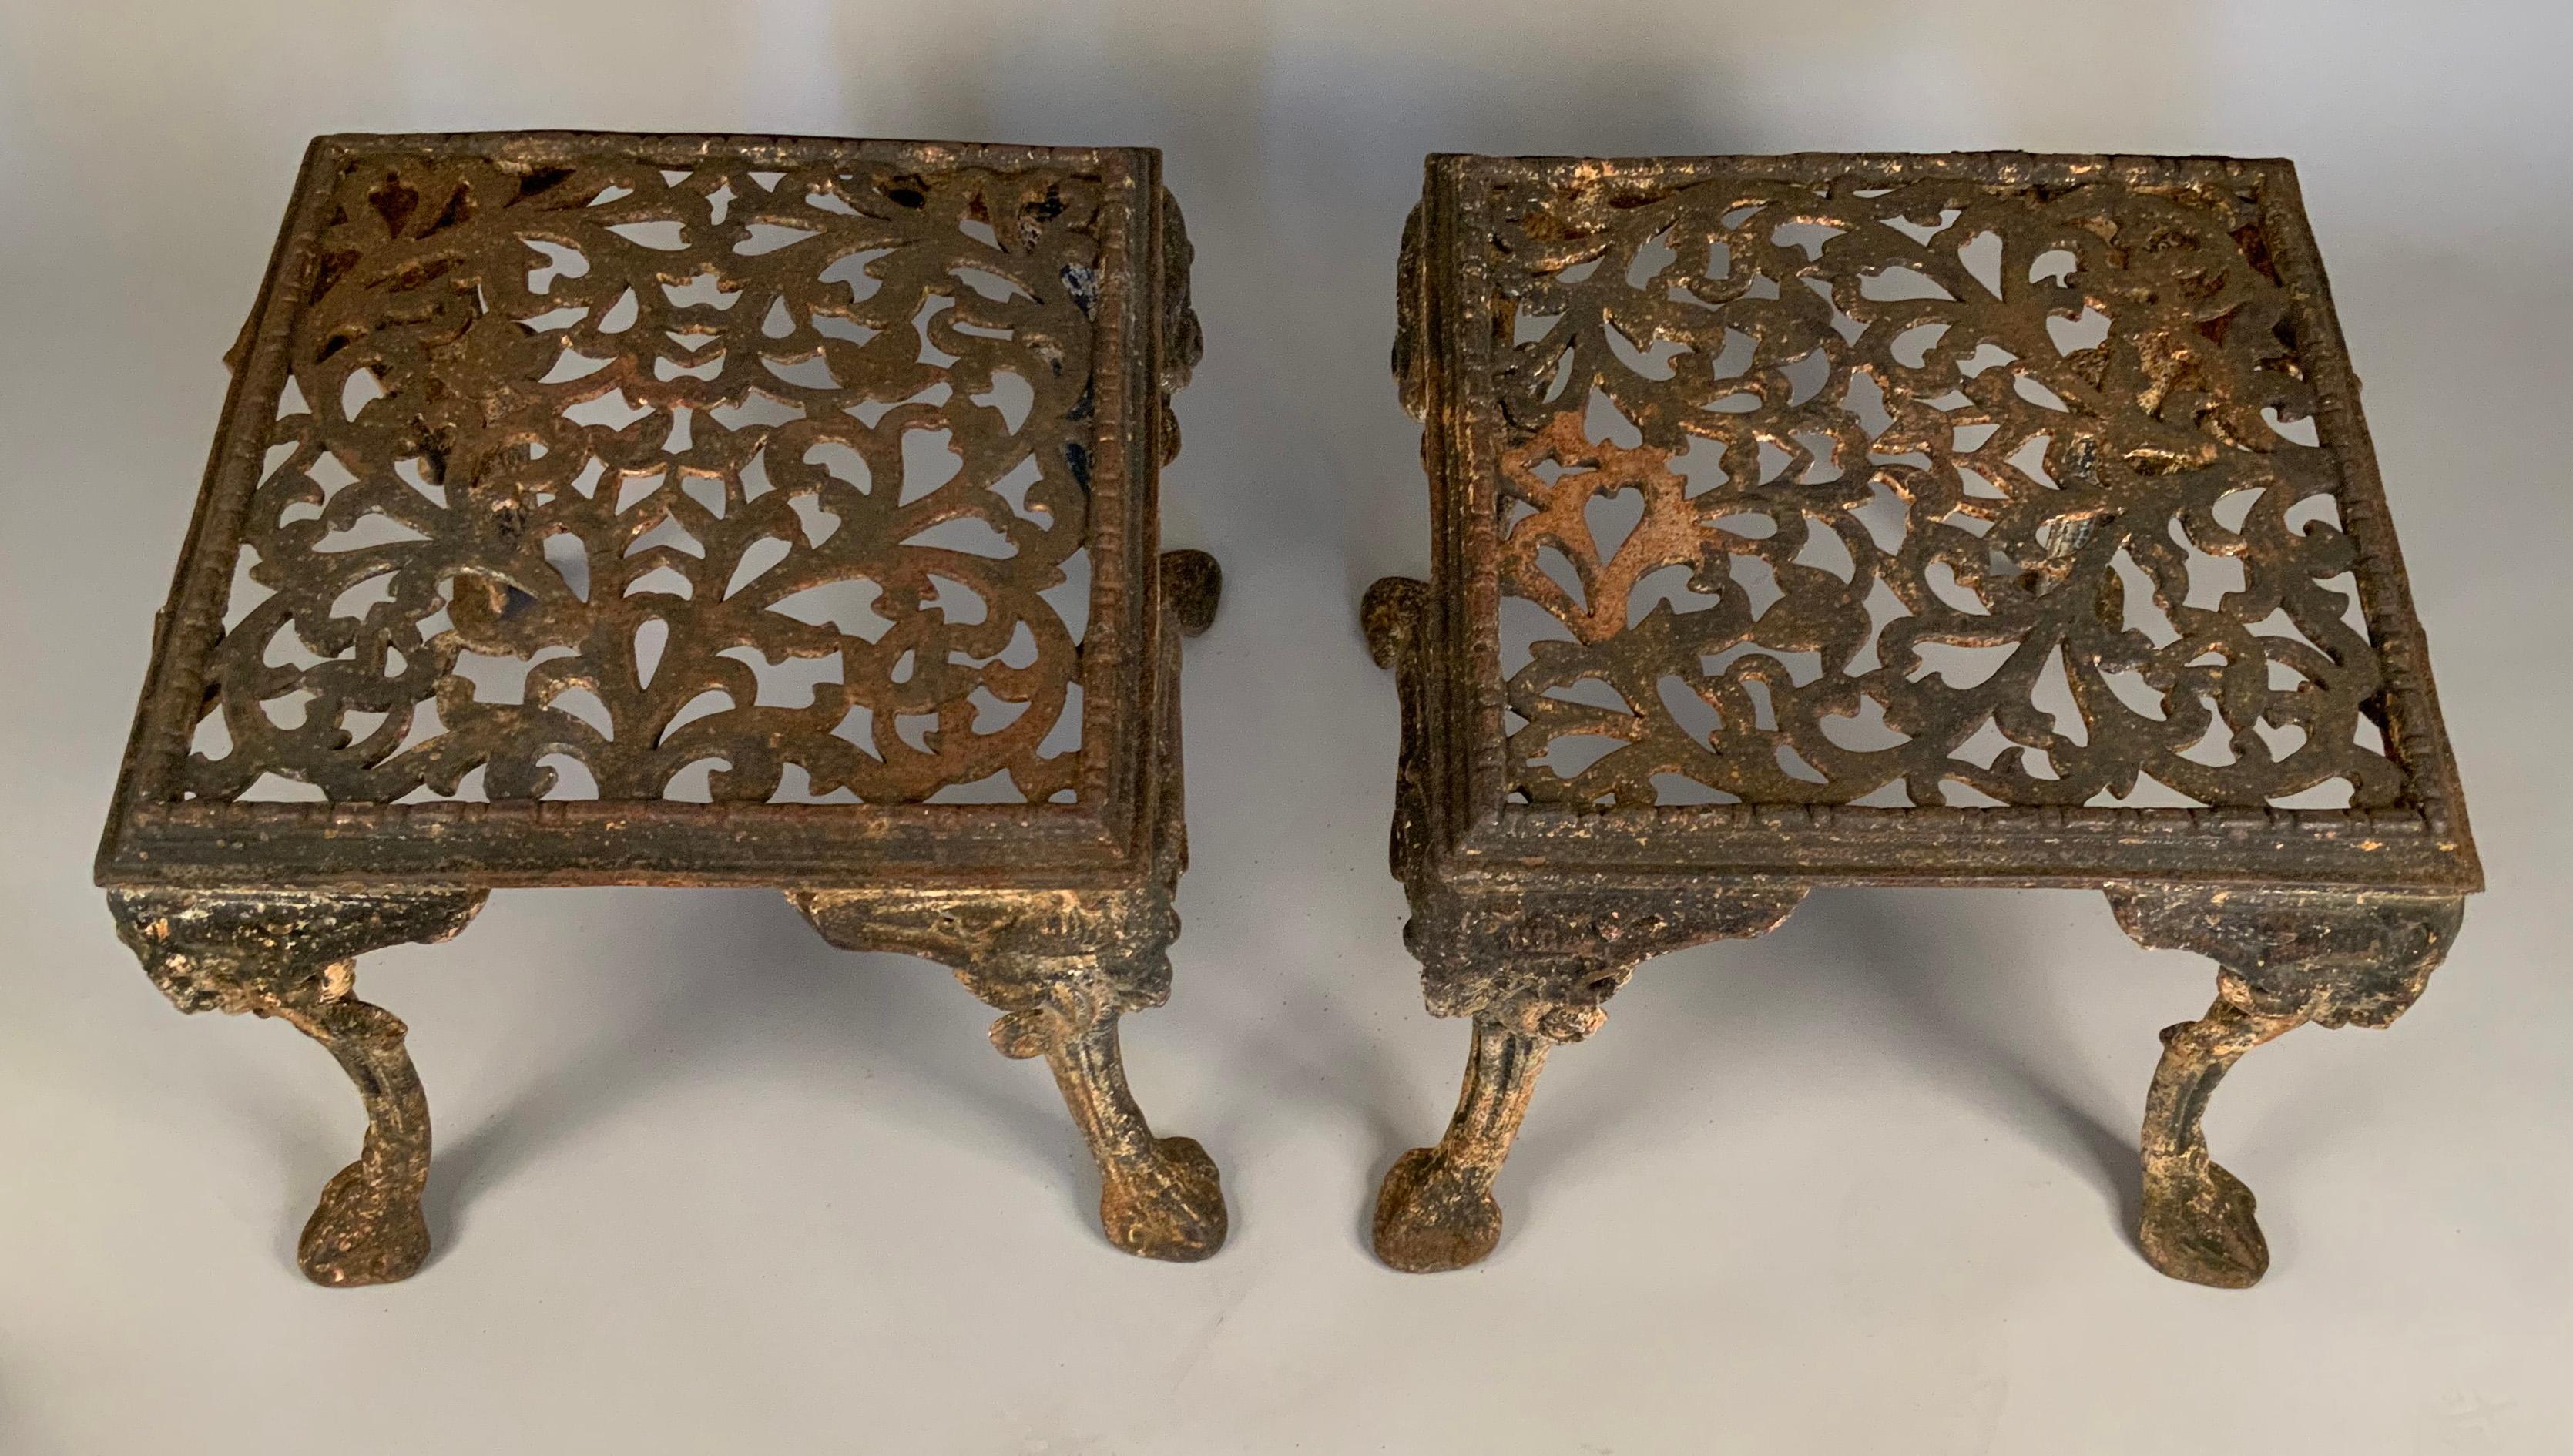 A very handsome pair of late 19th century cast iron garden benches or tables, with filigree tops and legs in the form of Satyrs. Very heavy and stable and well made, with beautiful old patina.